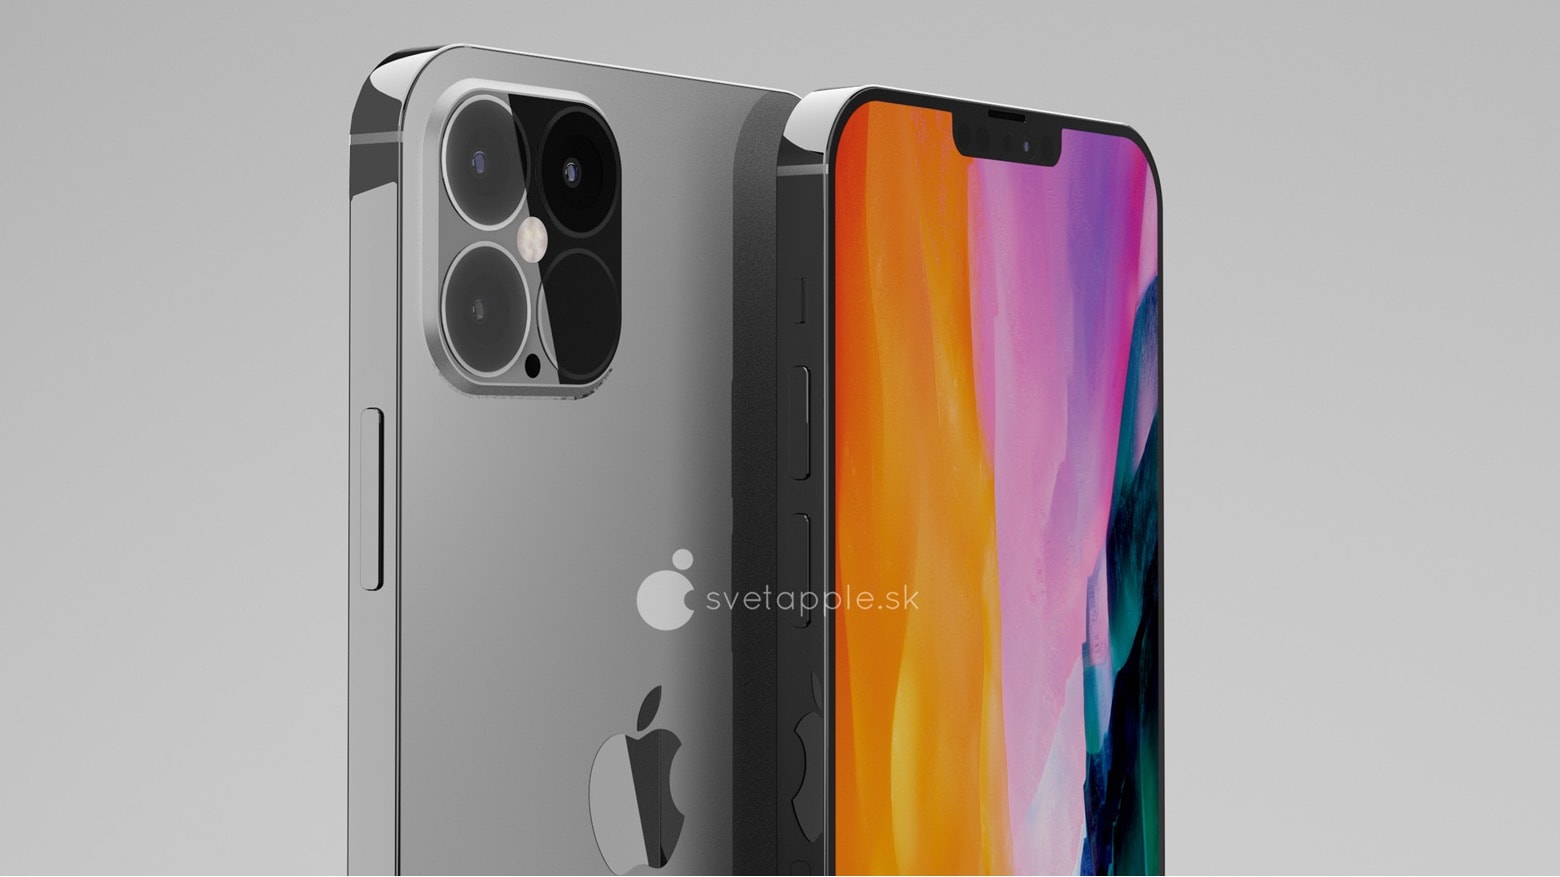 This iPhone 12 concept reflects all the latest rumors.